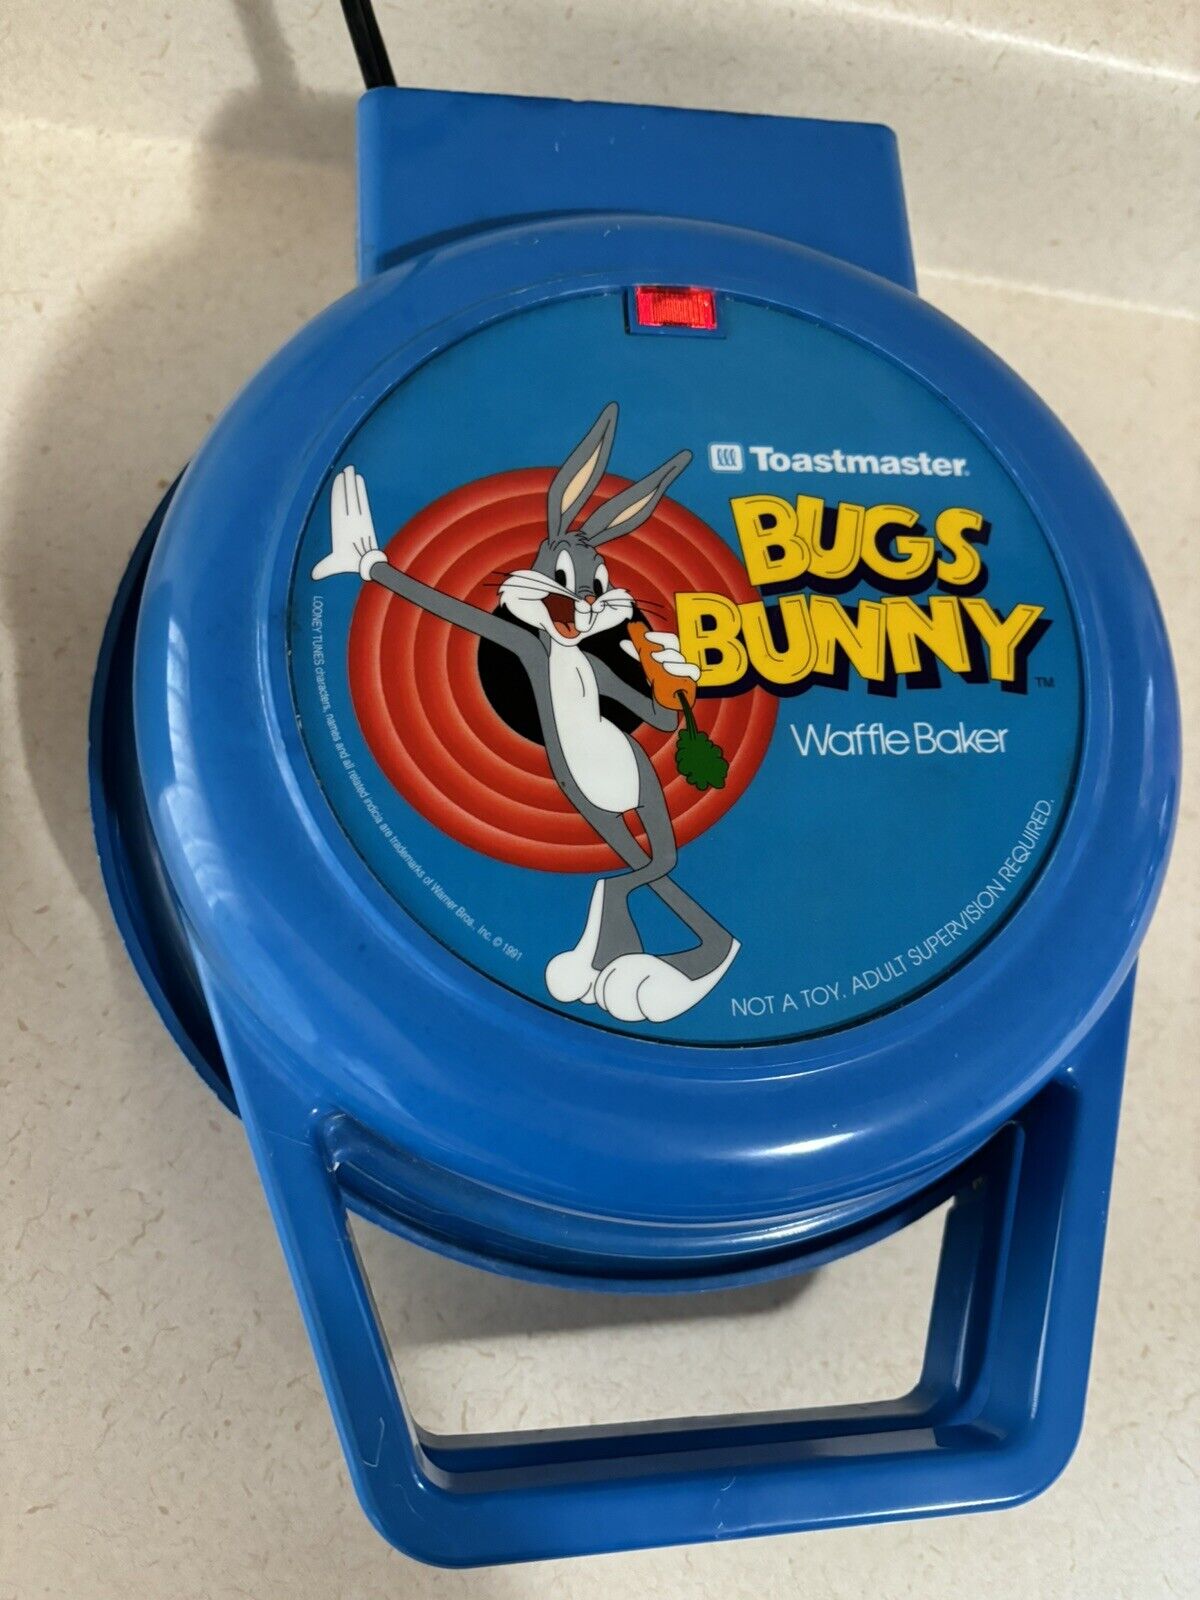 BUGS BUNNY Looney Tunes 1991 Toastmaster Waffle Baker.  Tested And Works